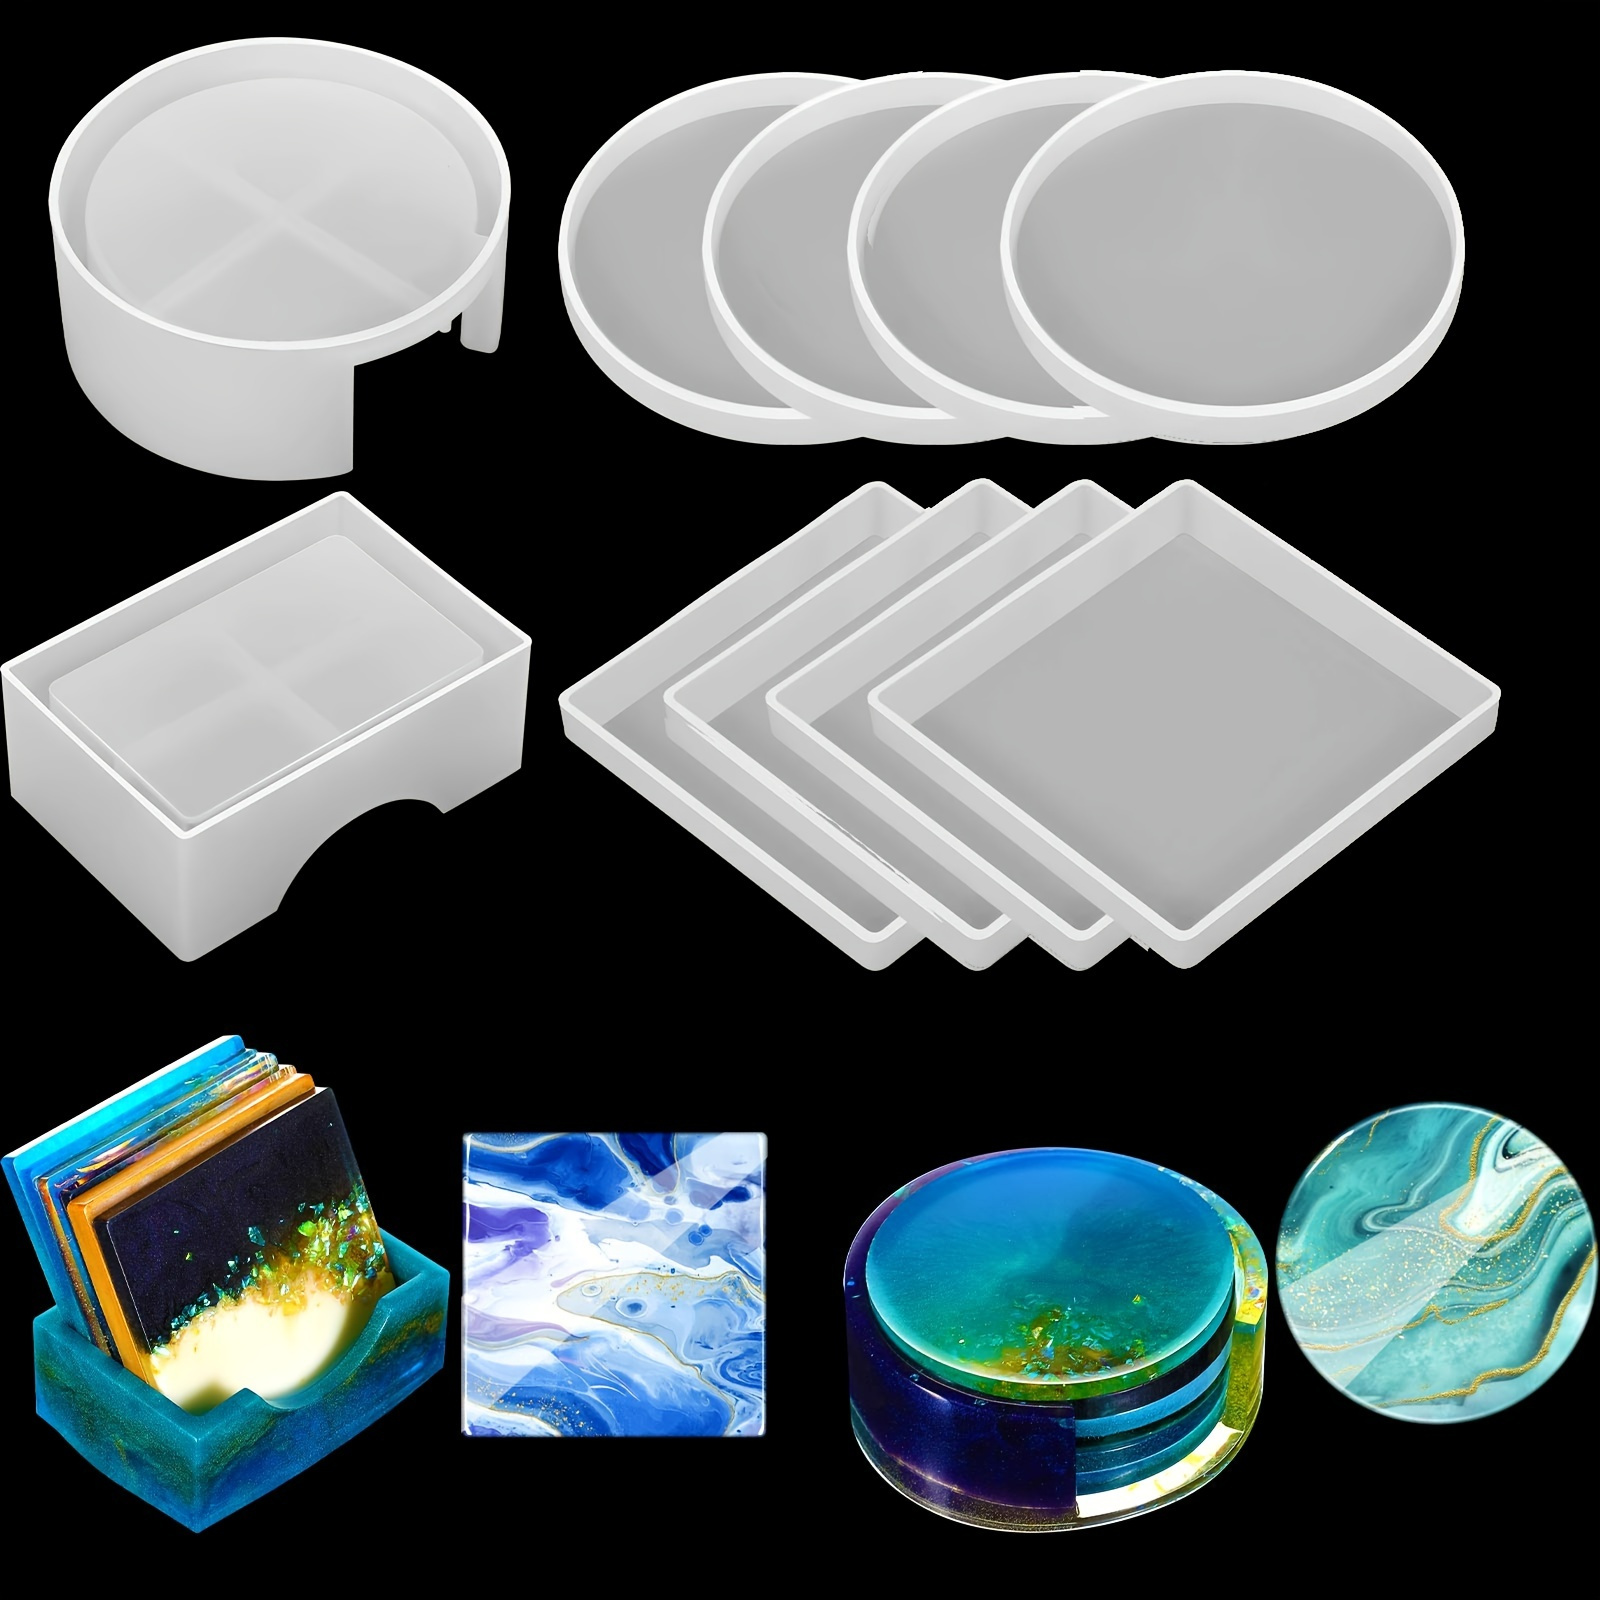 Resin molds, Silicone Kit for beginner, Silicone Molds for Epoxy Resin  Casting, Including Sphere, Cube, Pyramid and 3pcs Coaster Moulds-Round,  Square